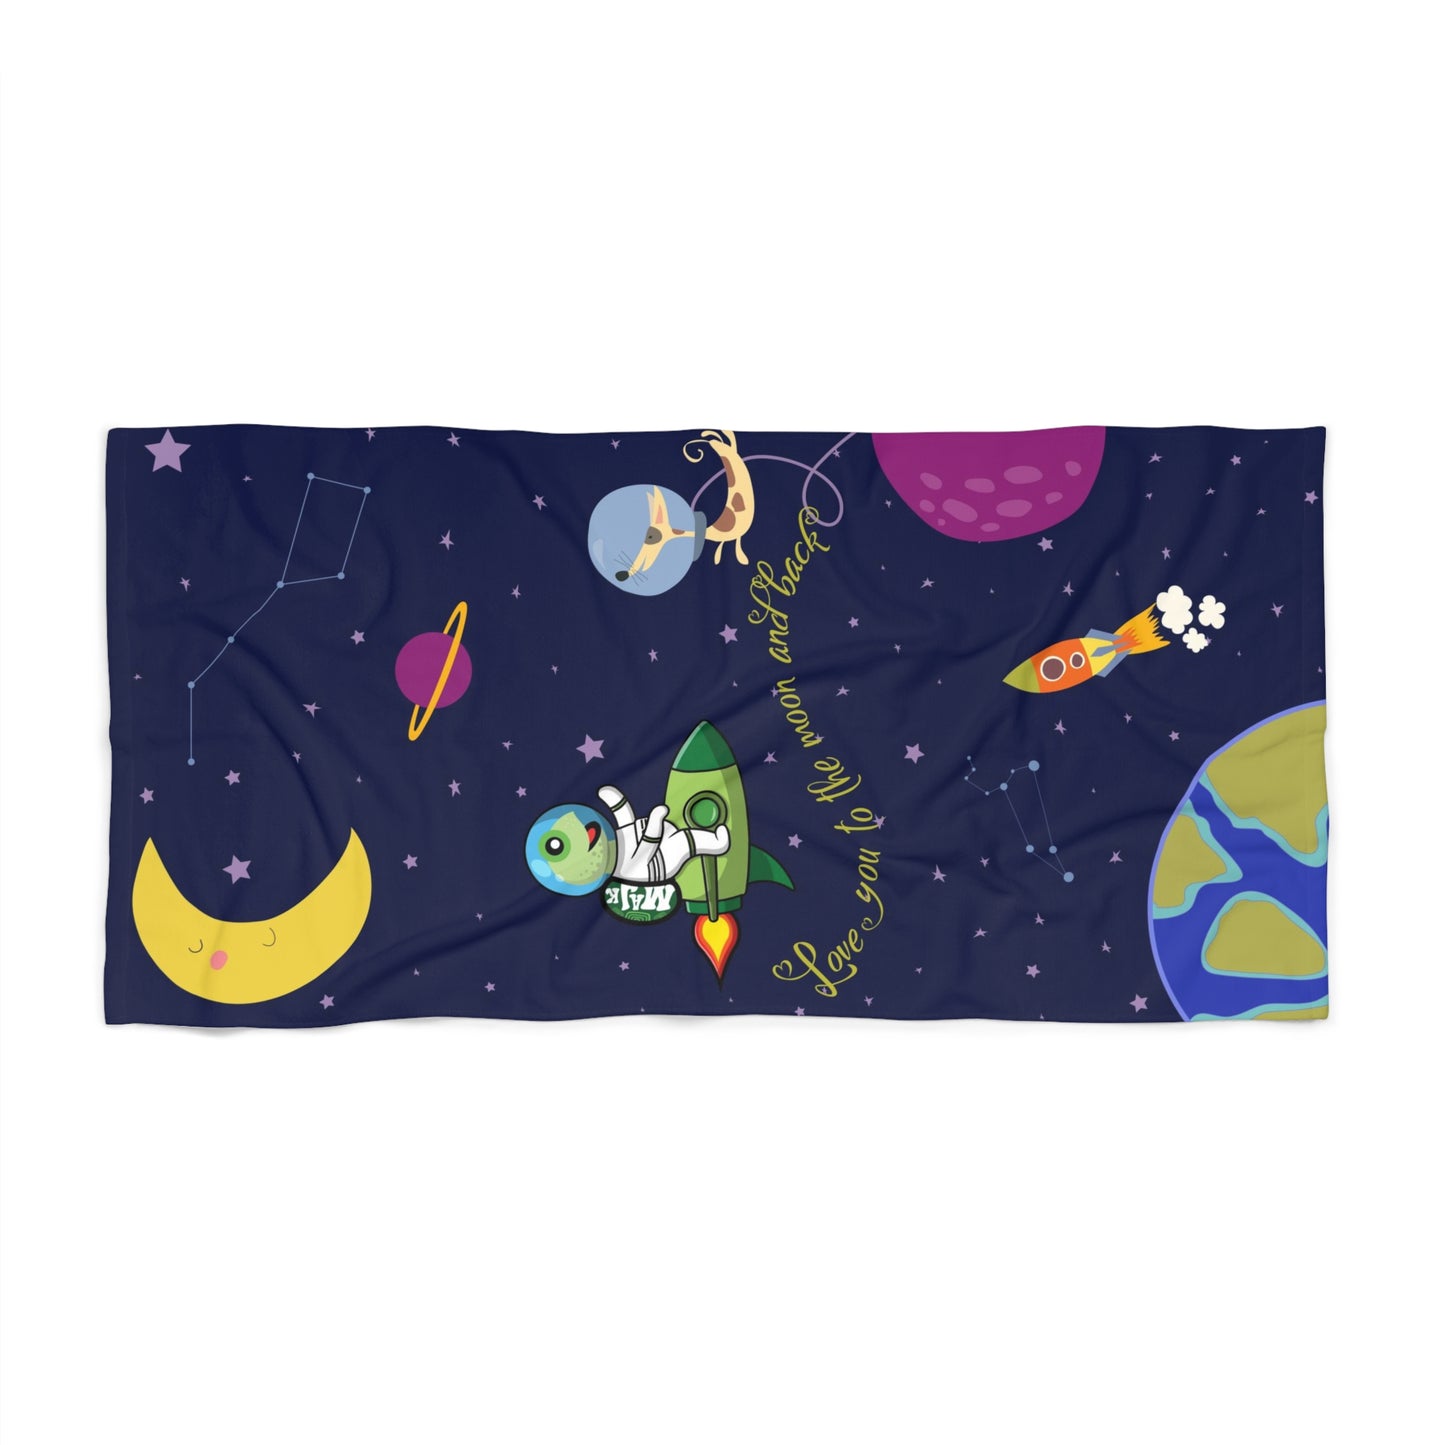 30in x 60in Kids Beach Towel  "Love You to The Moon and Back"